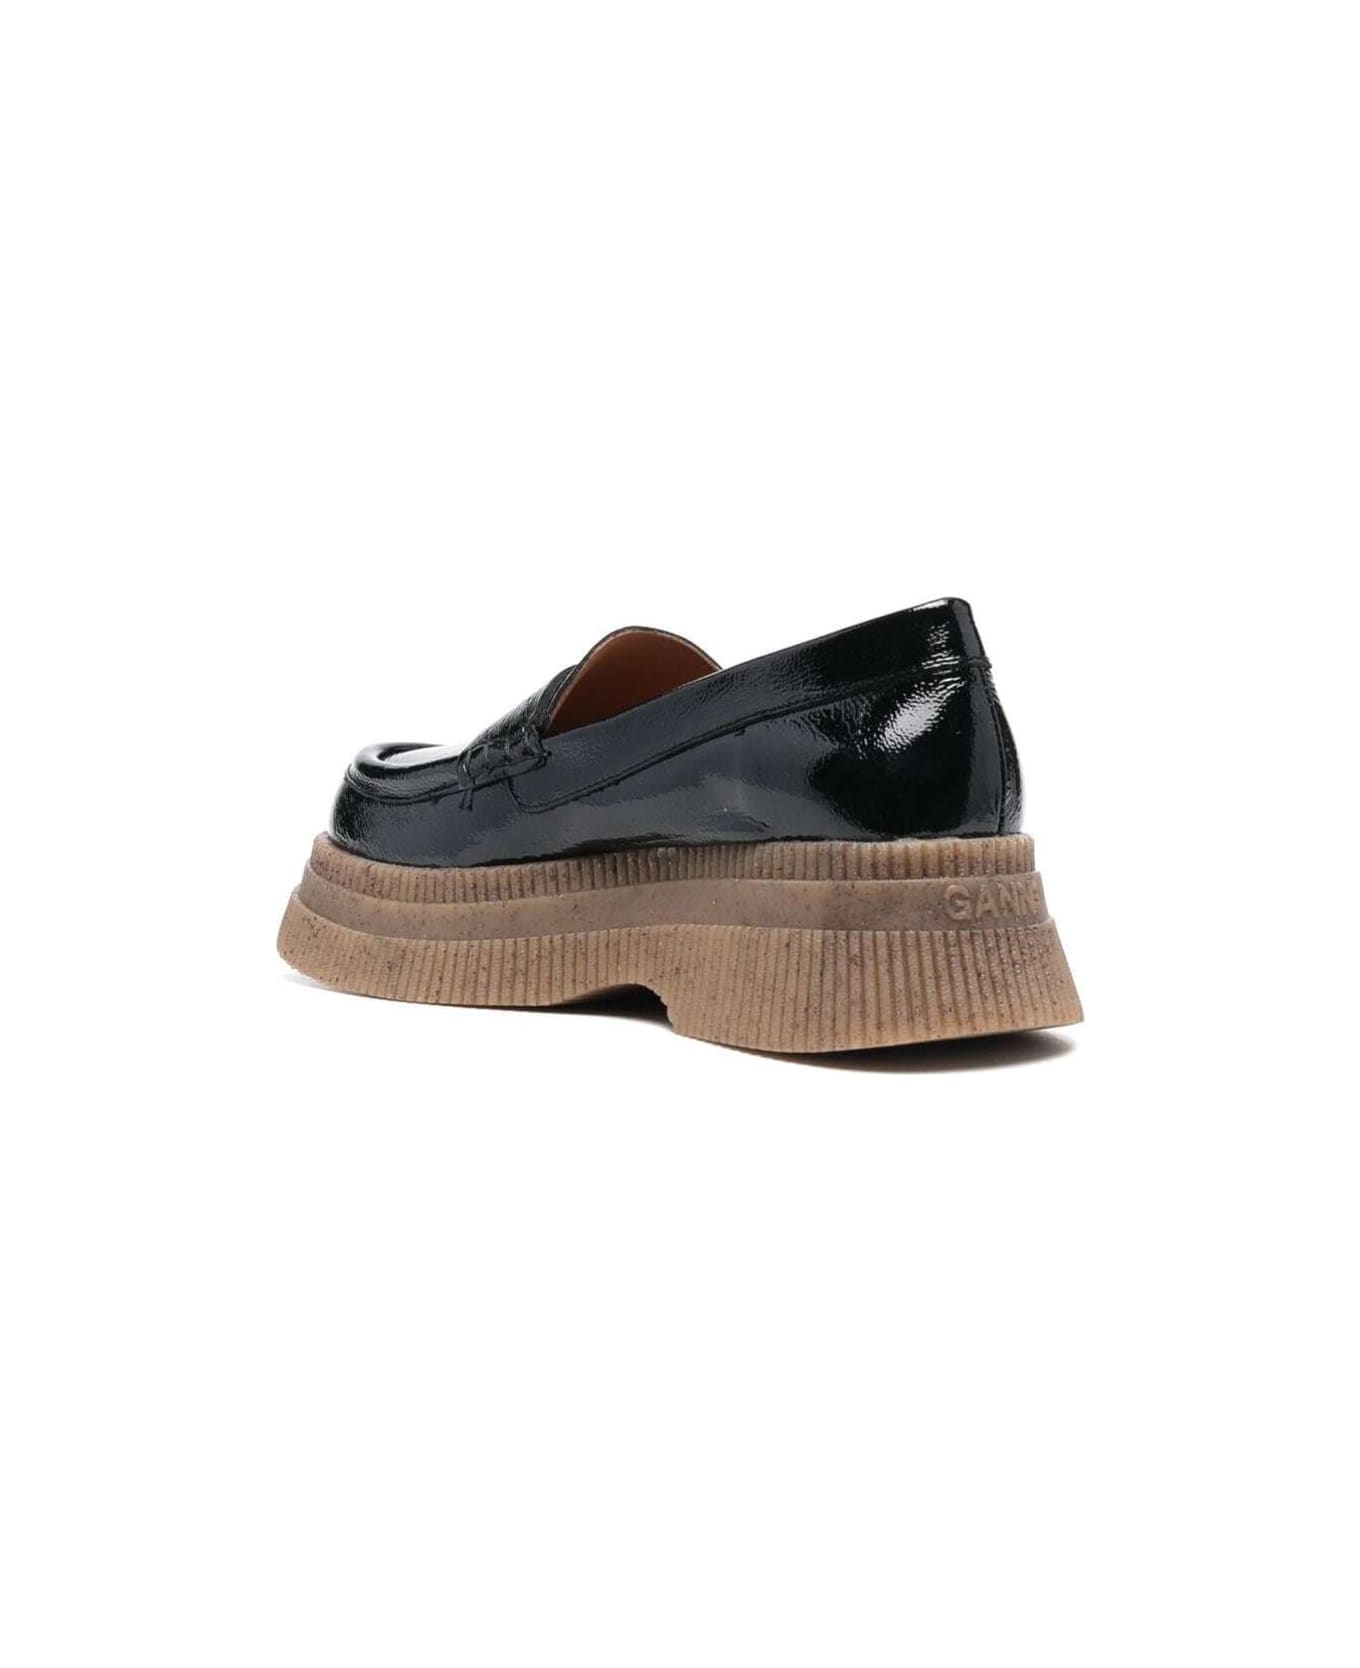 Ganni Creepers Wallaby Loafer - Black